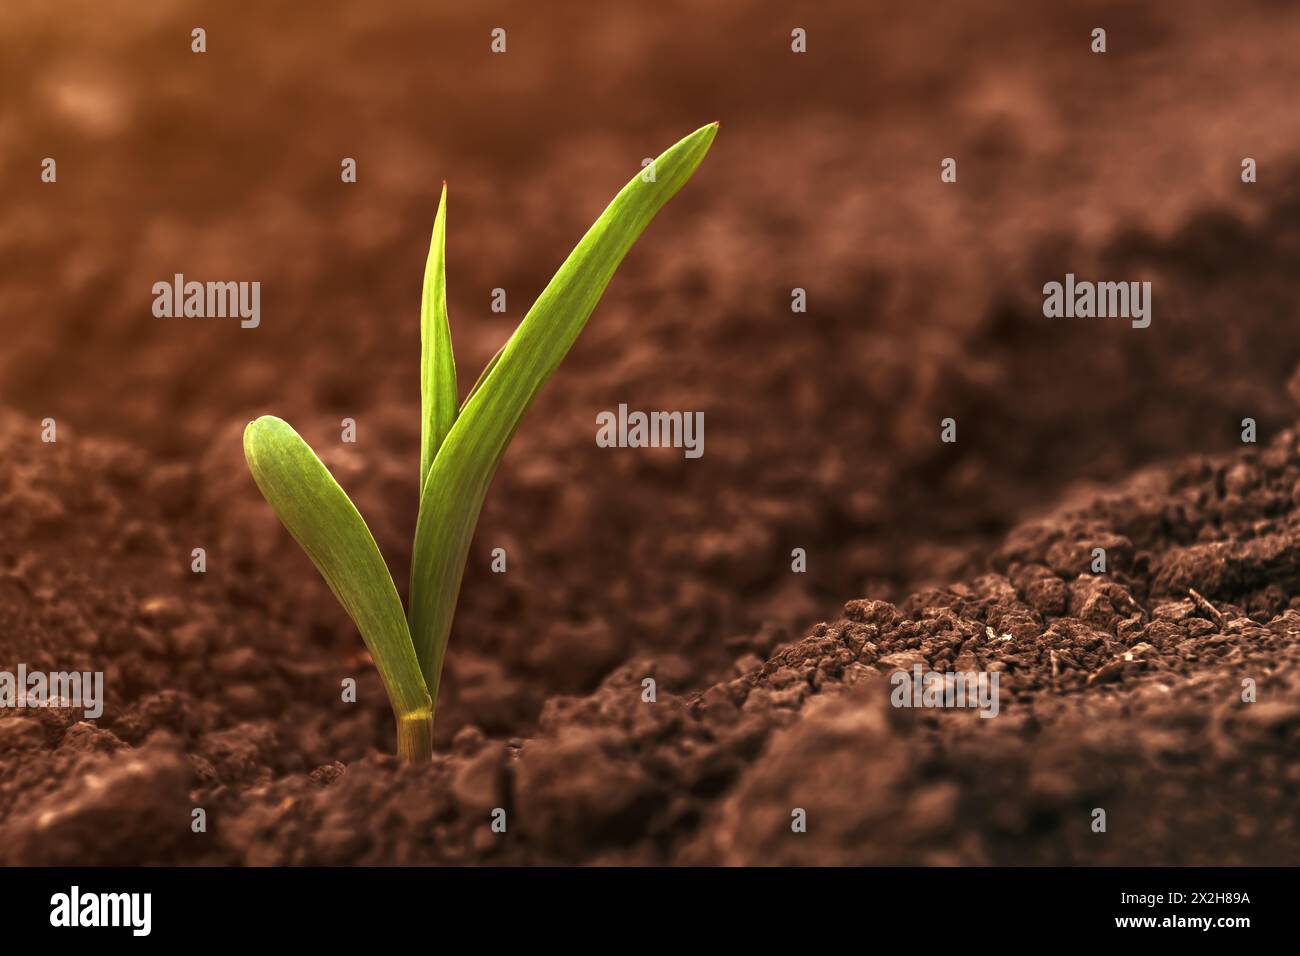 Corn crop small green seedling growing out of agricultural field soil in spring, selective focus Stock Photo